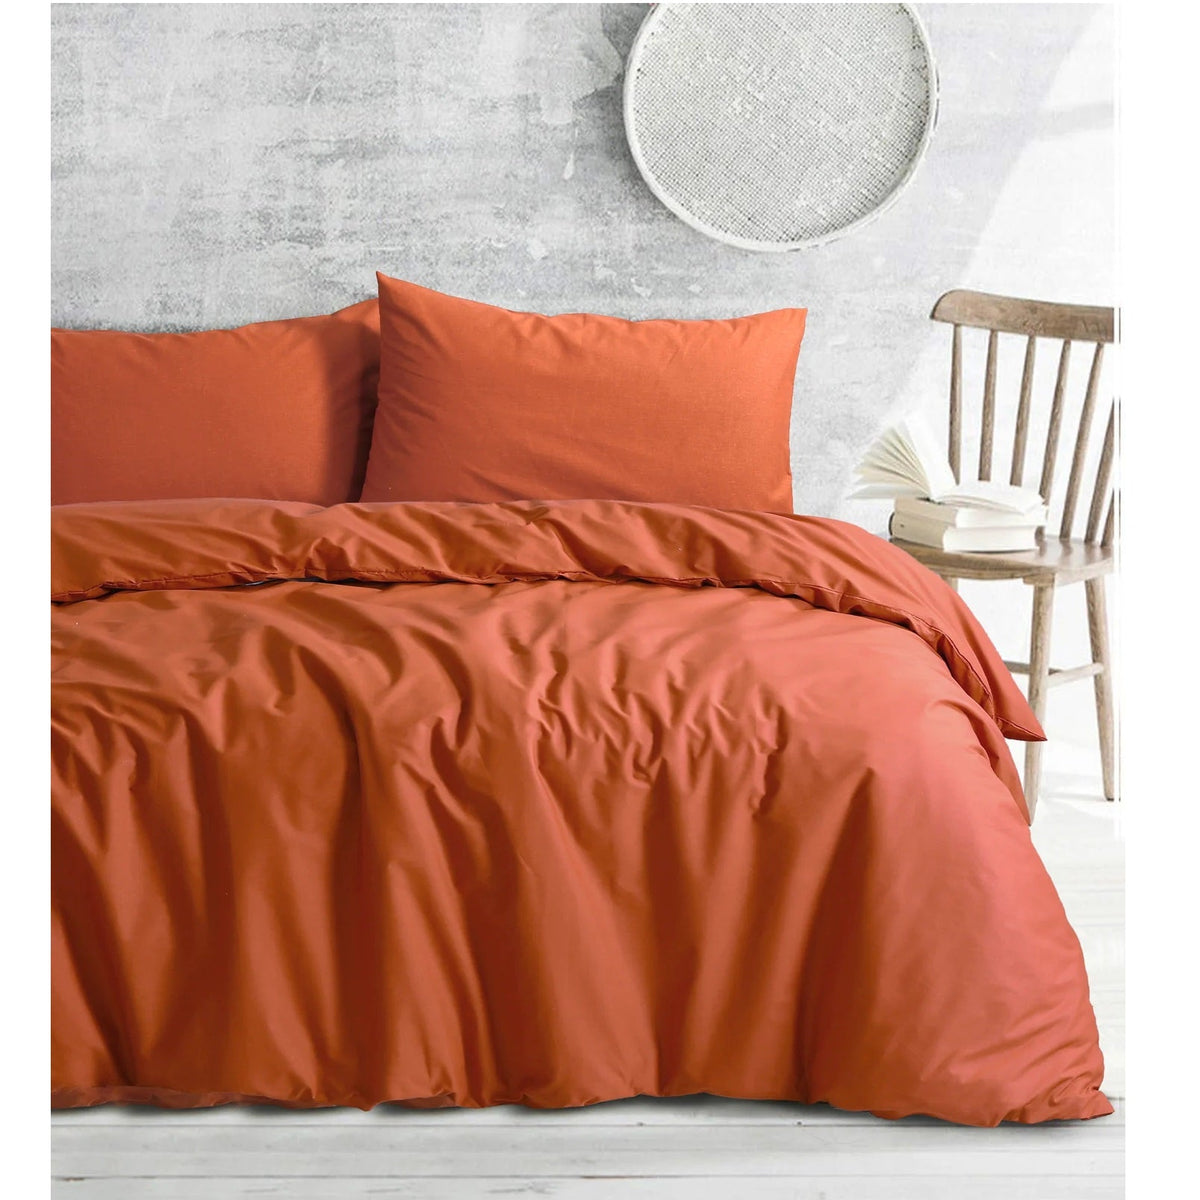 Royale Cotton Quilt Duvet Doona Cover with extra standard pillowcases pair - Rust